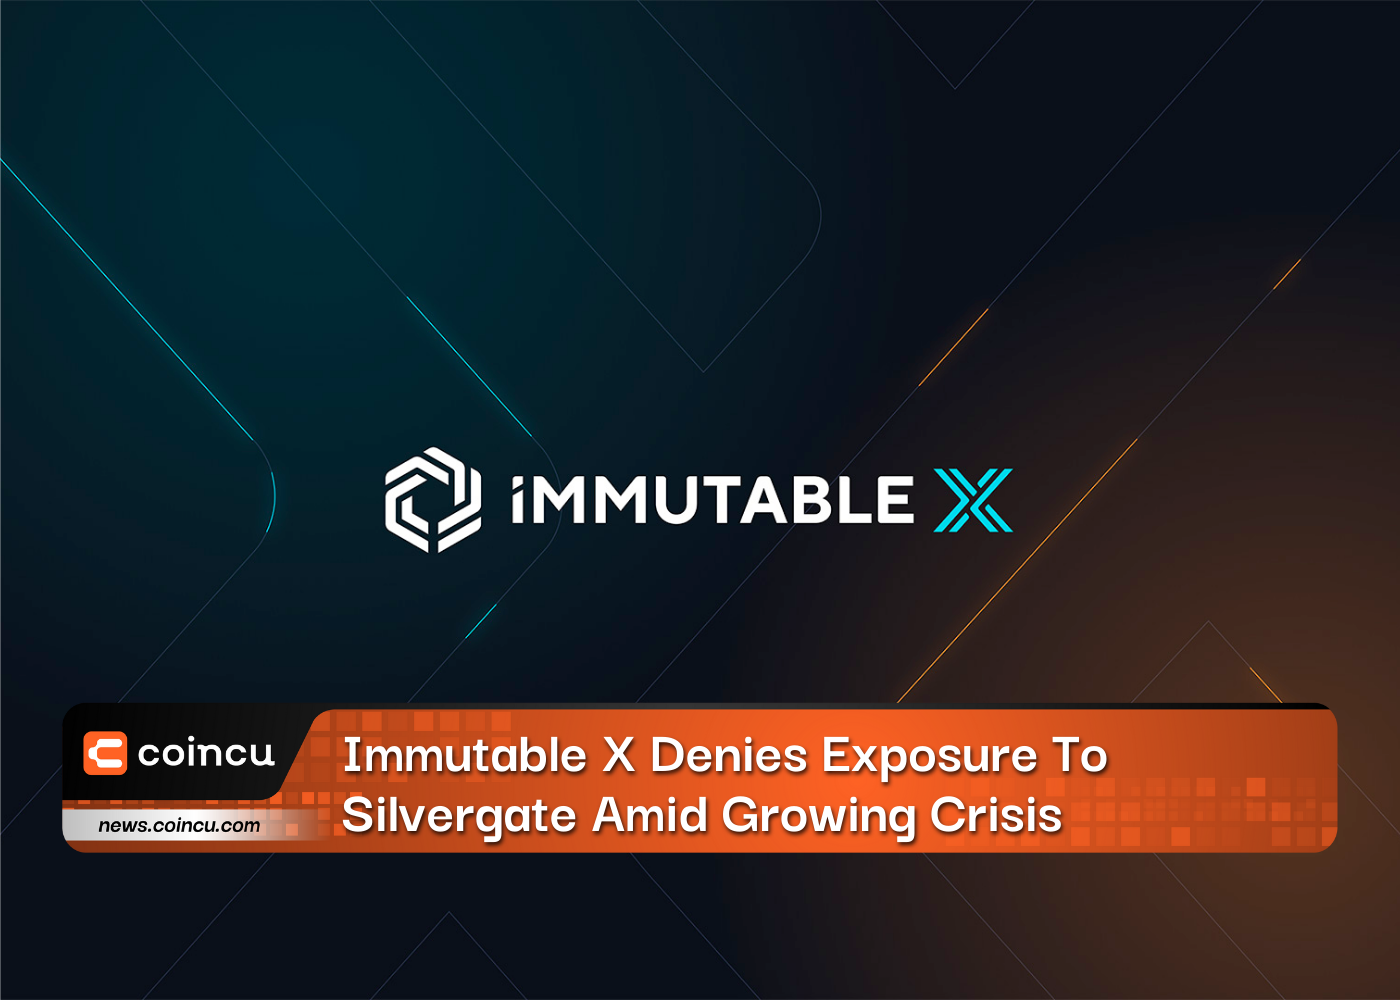 Immutable X Denies Exposure To Silvergate Amid Growing Crisis